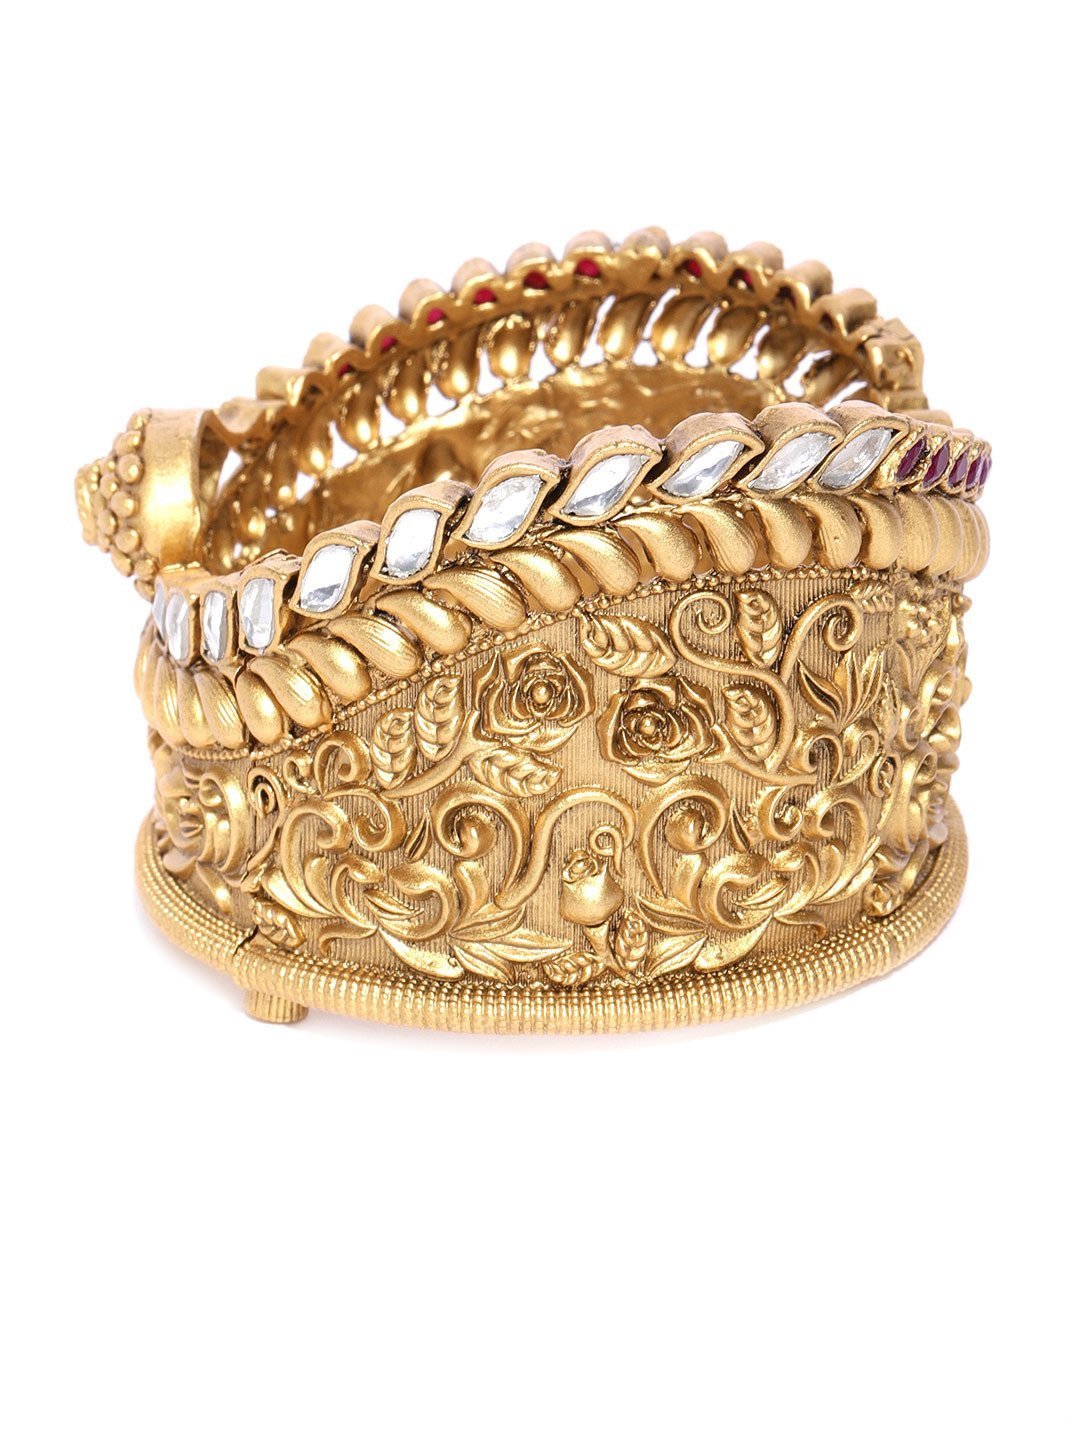 Women's Gold-Plated Kundan and Ruby Studded Floral Patterned Broad Bracelet - Priyaasi